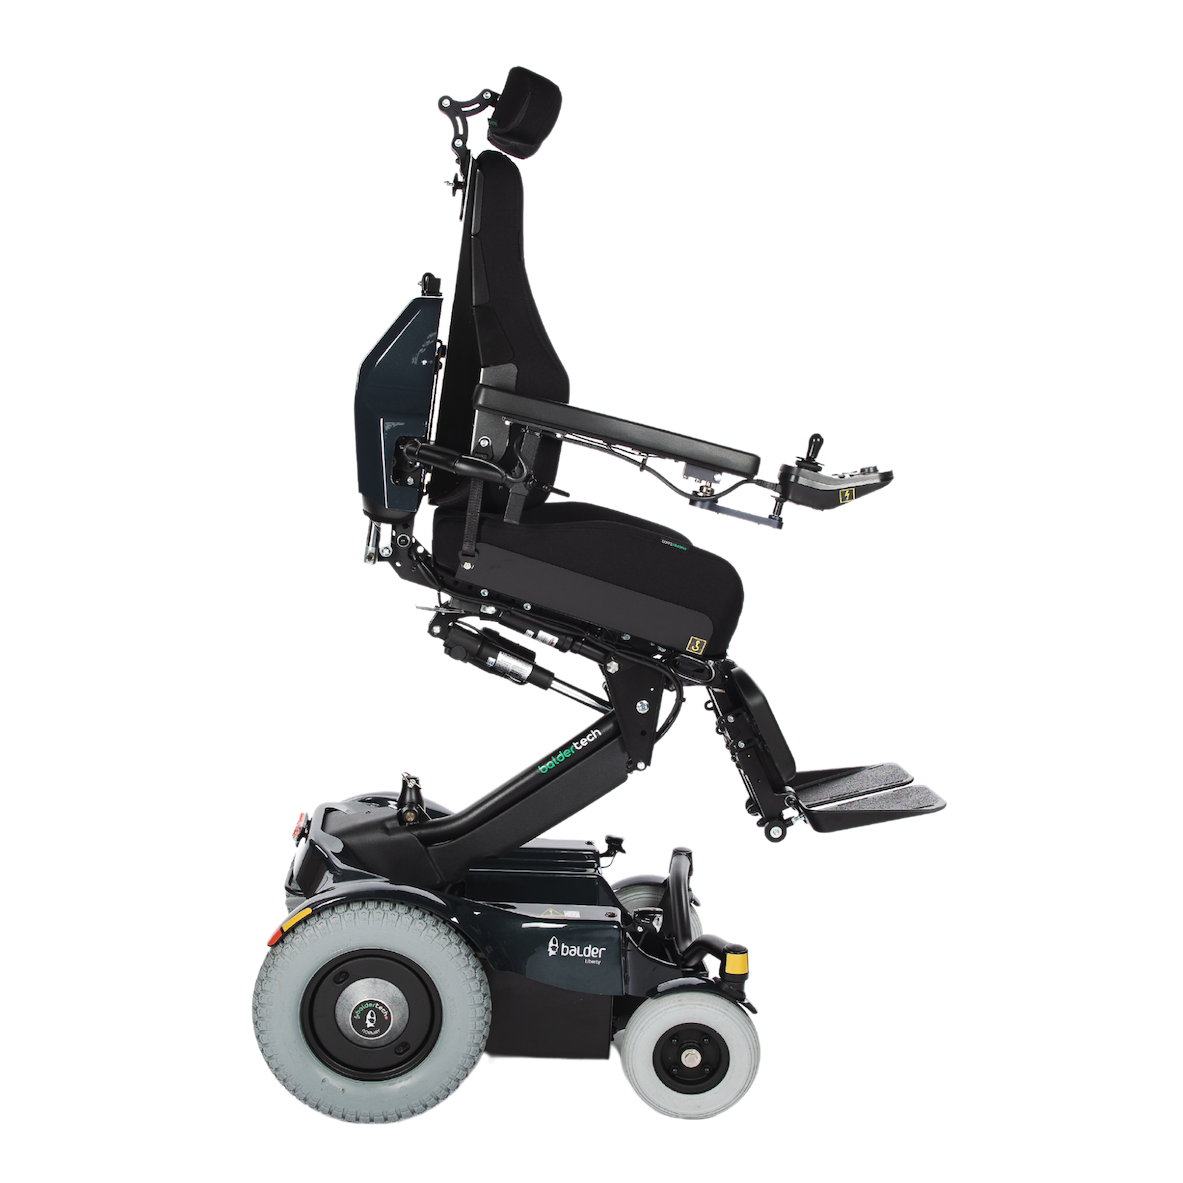 A side view of the Balder Liberty L380 powerchair in the elevated position and leaning forward. A rear wheel drive electric wheelchair.